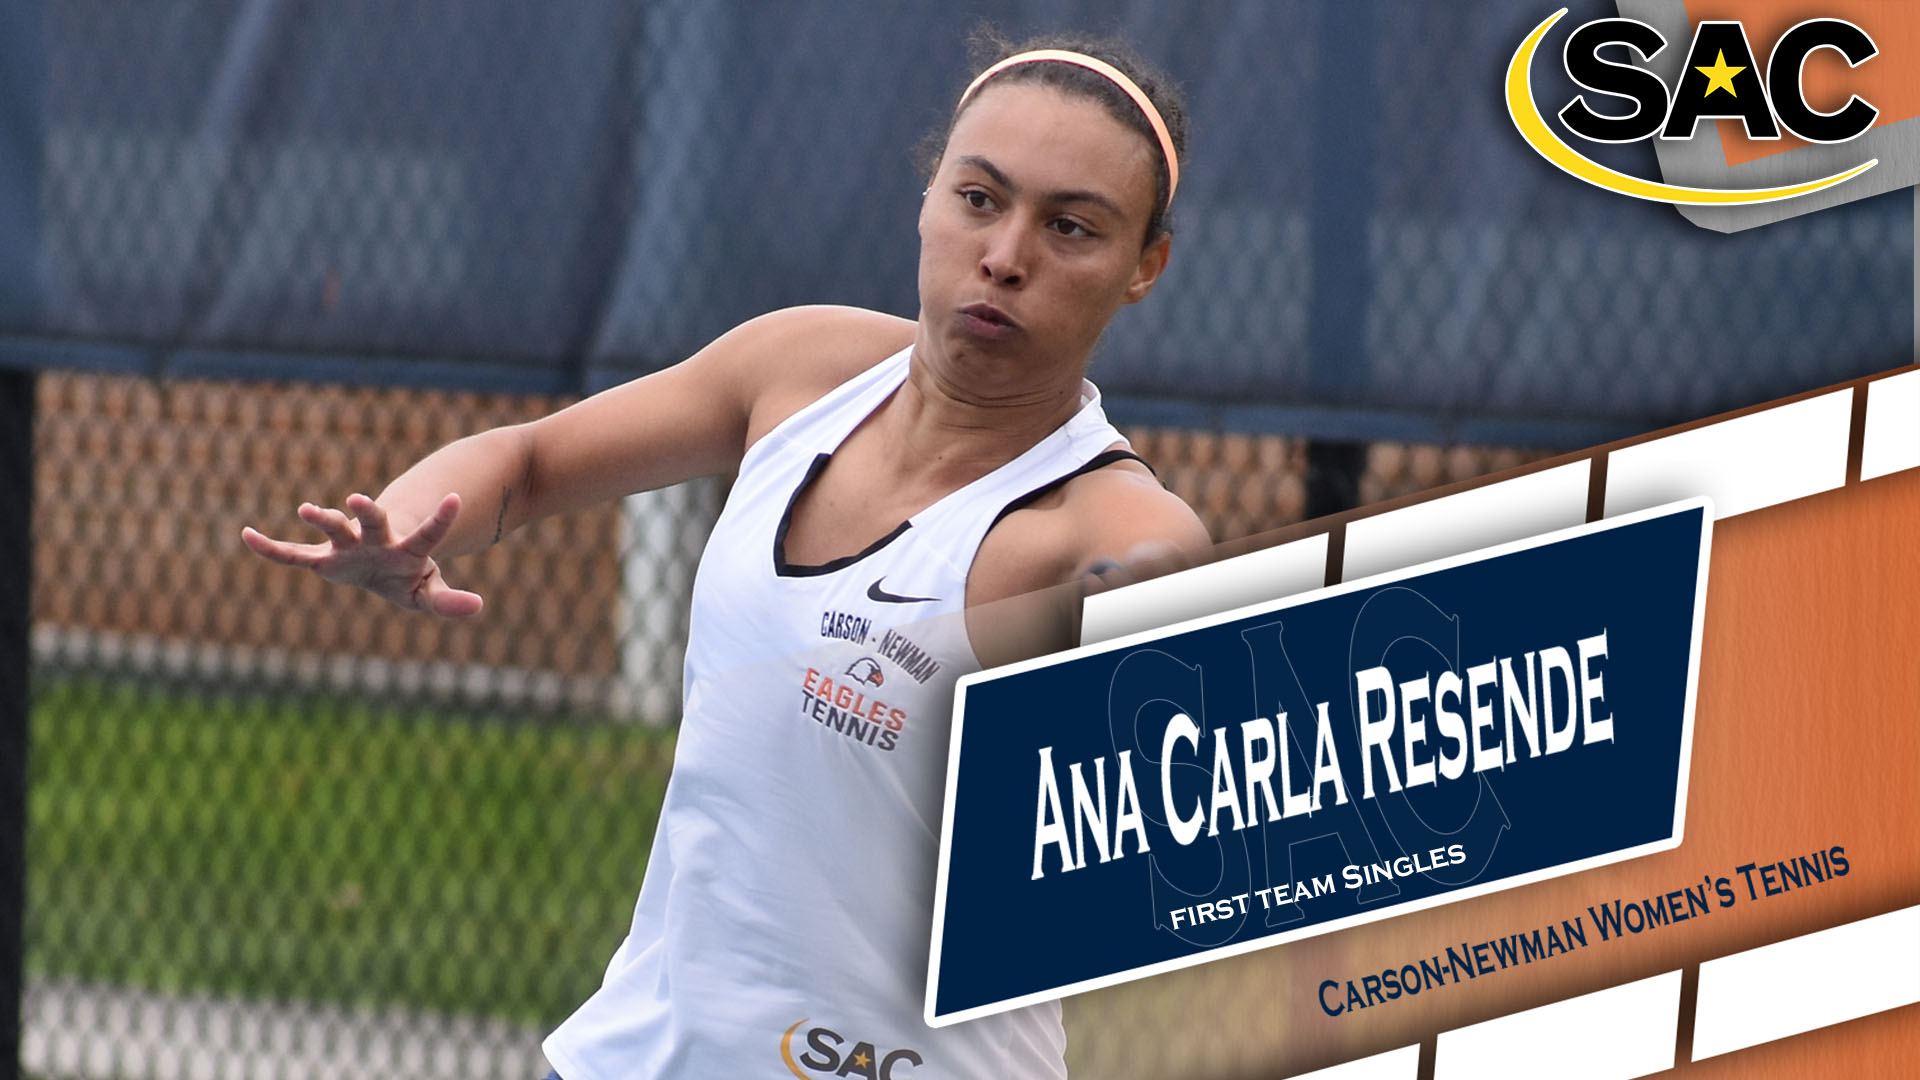 Resende tabbed First-Team All-SAC singles for second straight year